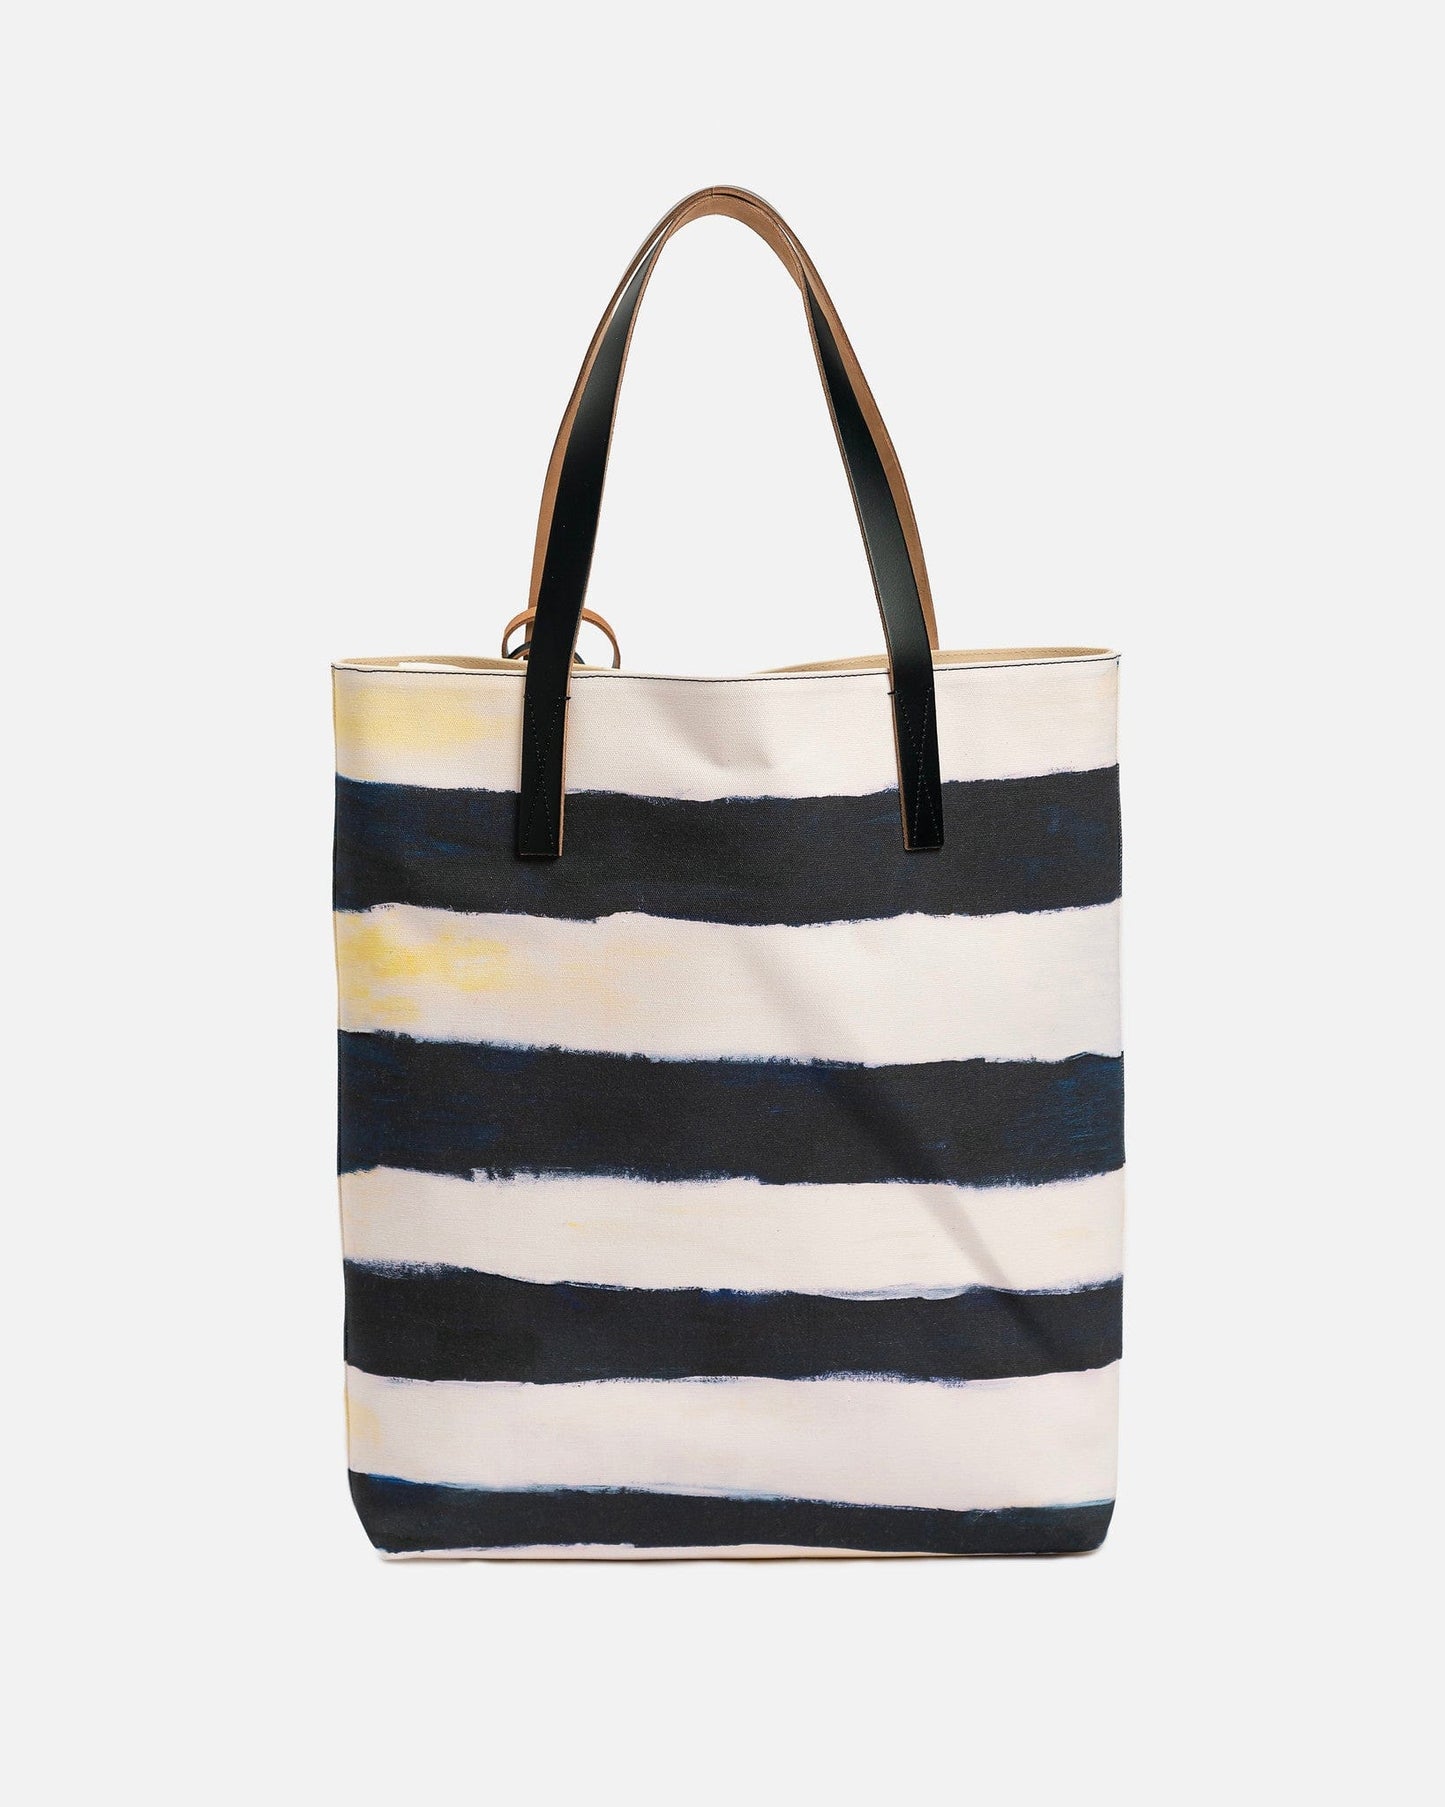 Marni Women Bags Hand Painted Graphic Tribeca Shopping Bag in Multi